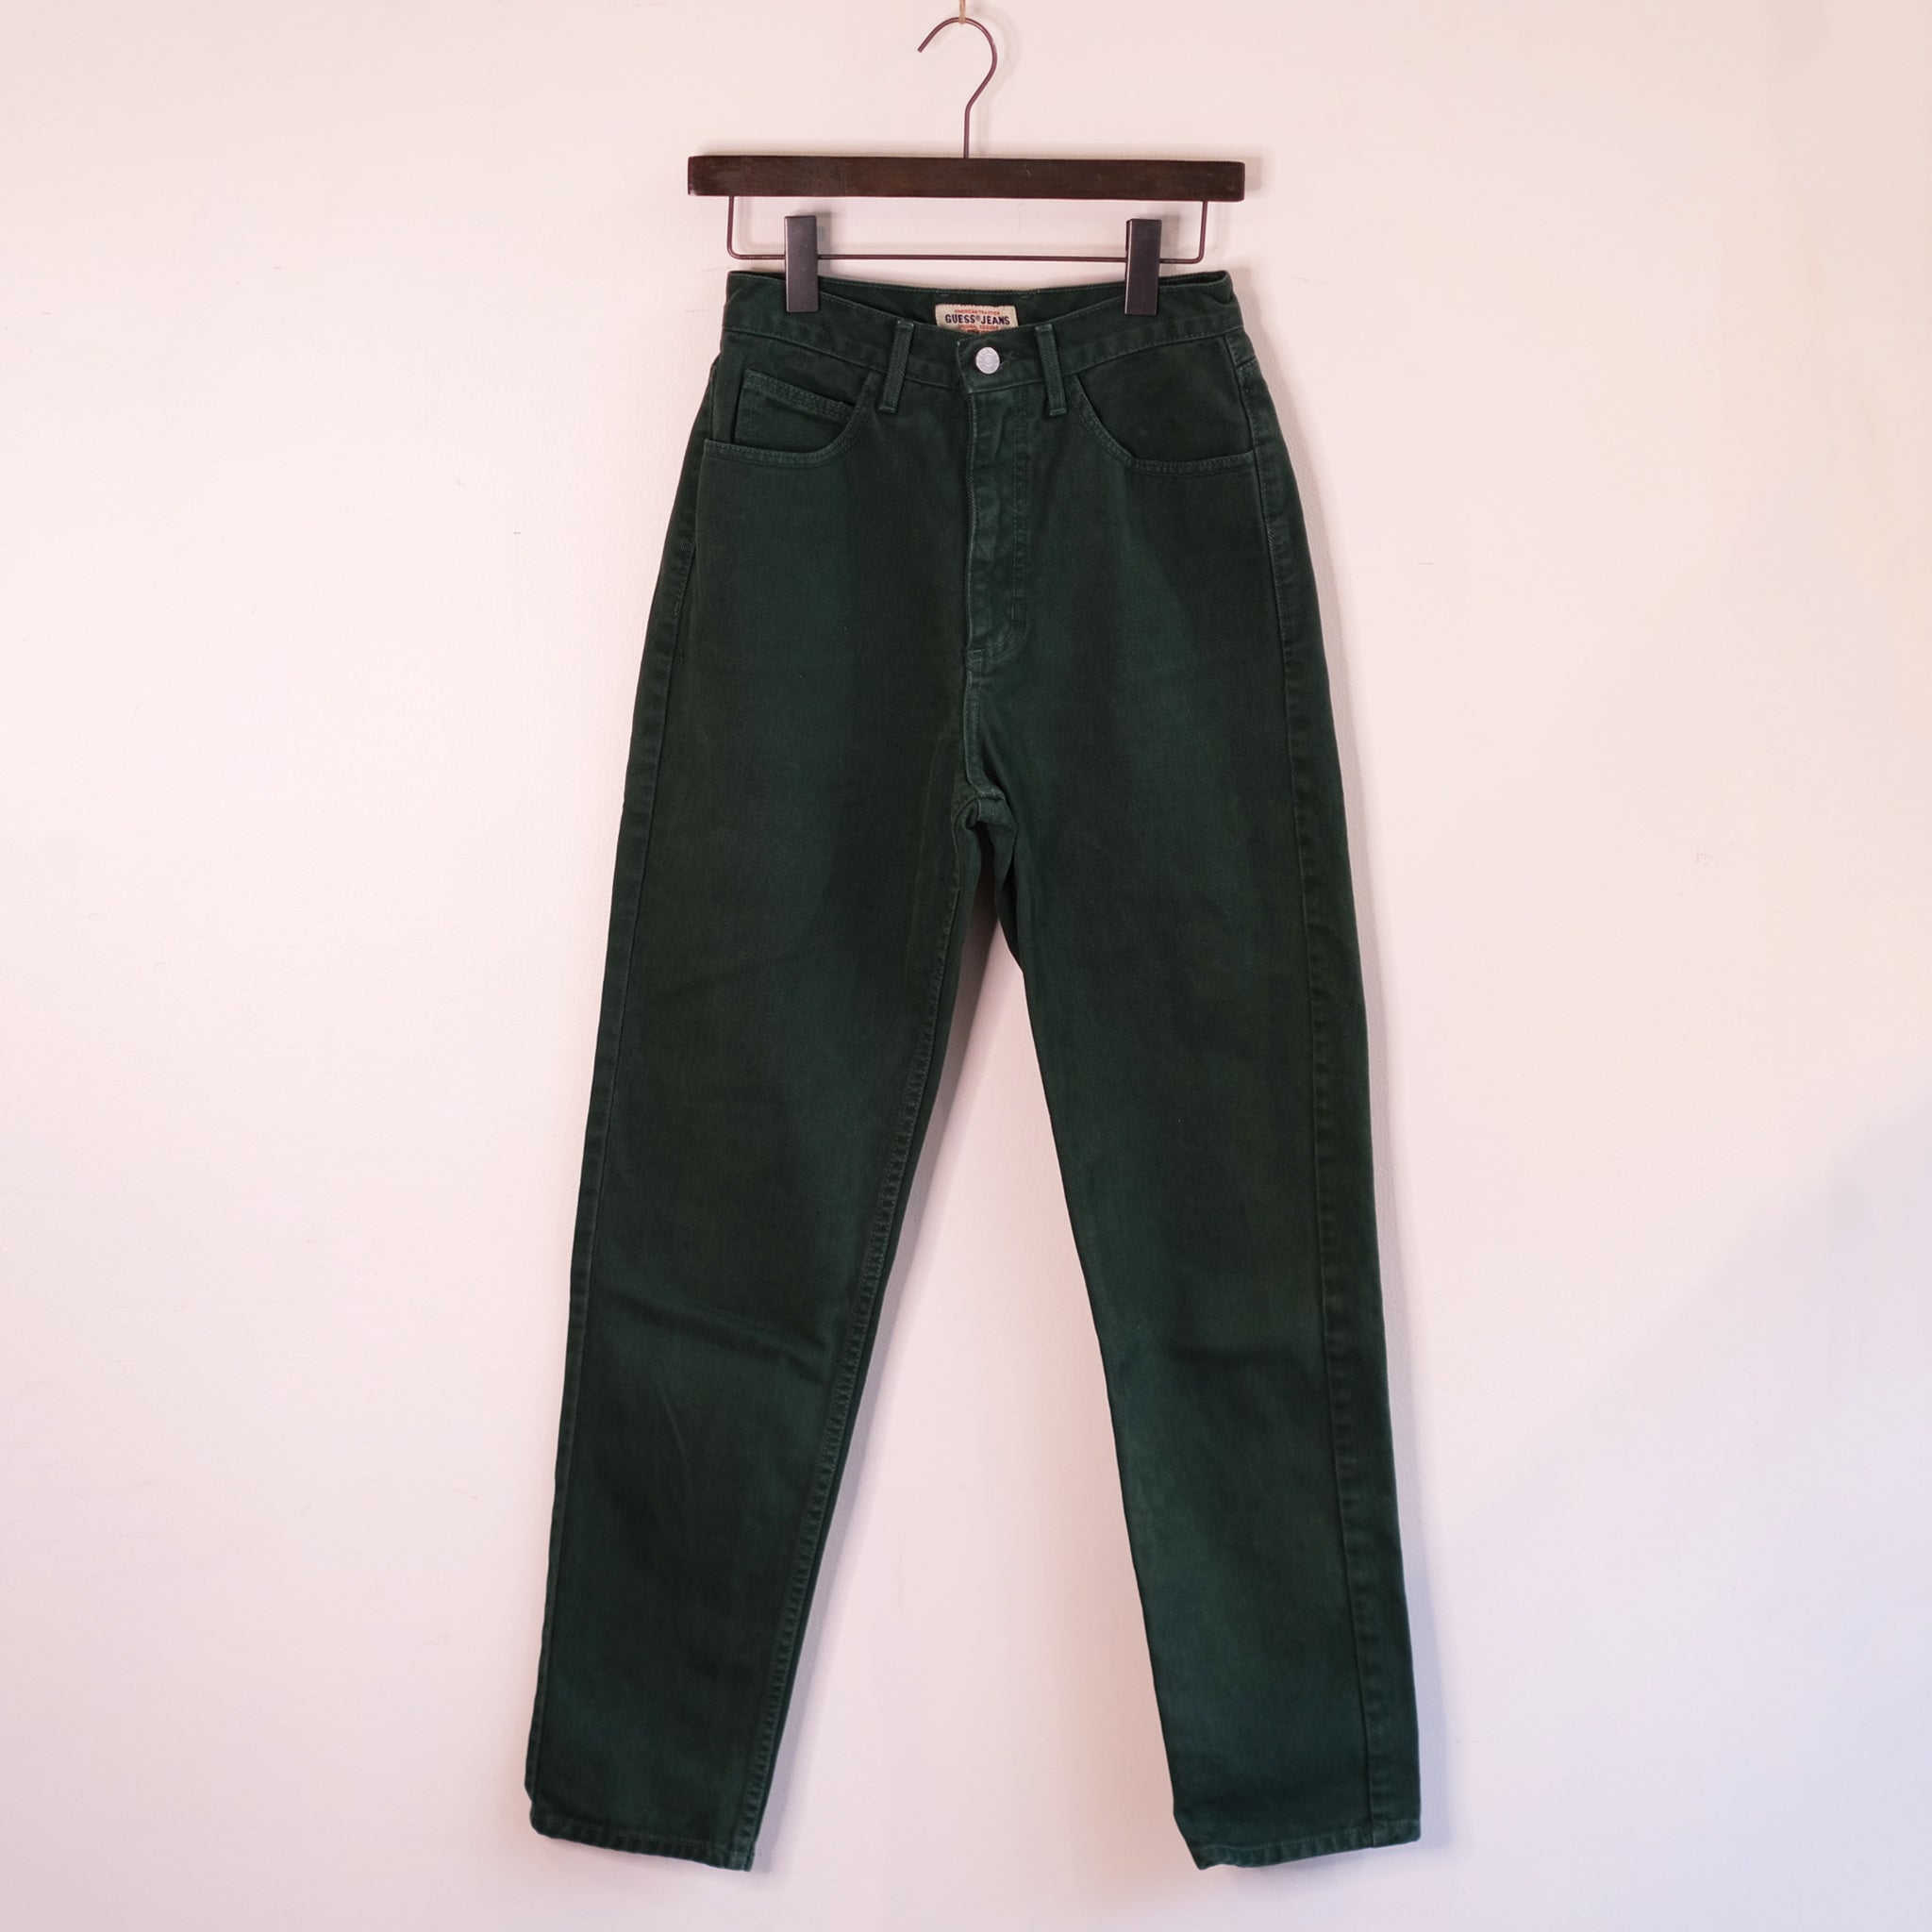 Vintage Guess Green Jeans